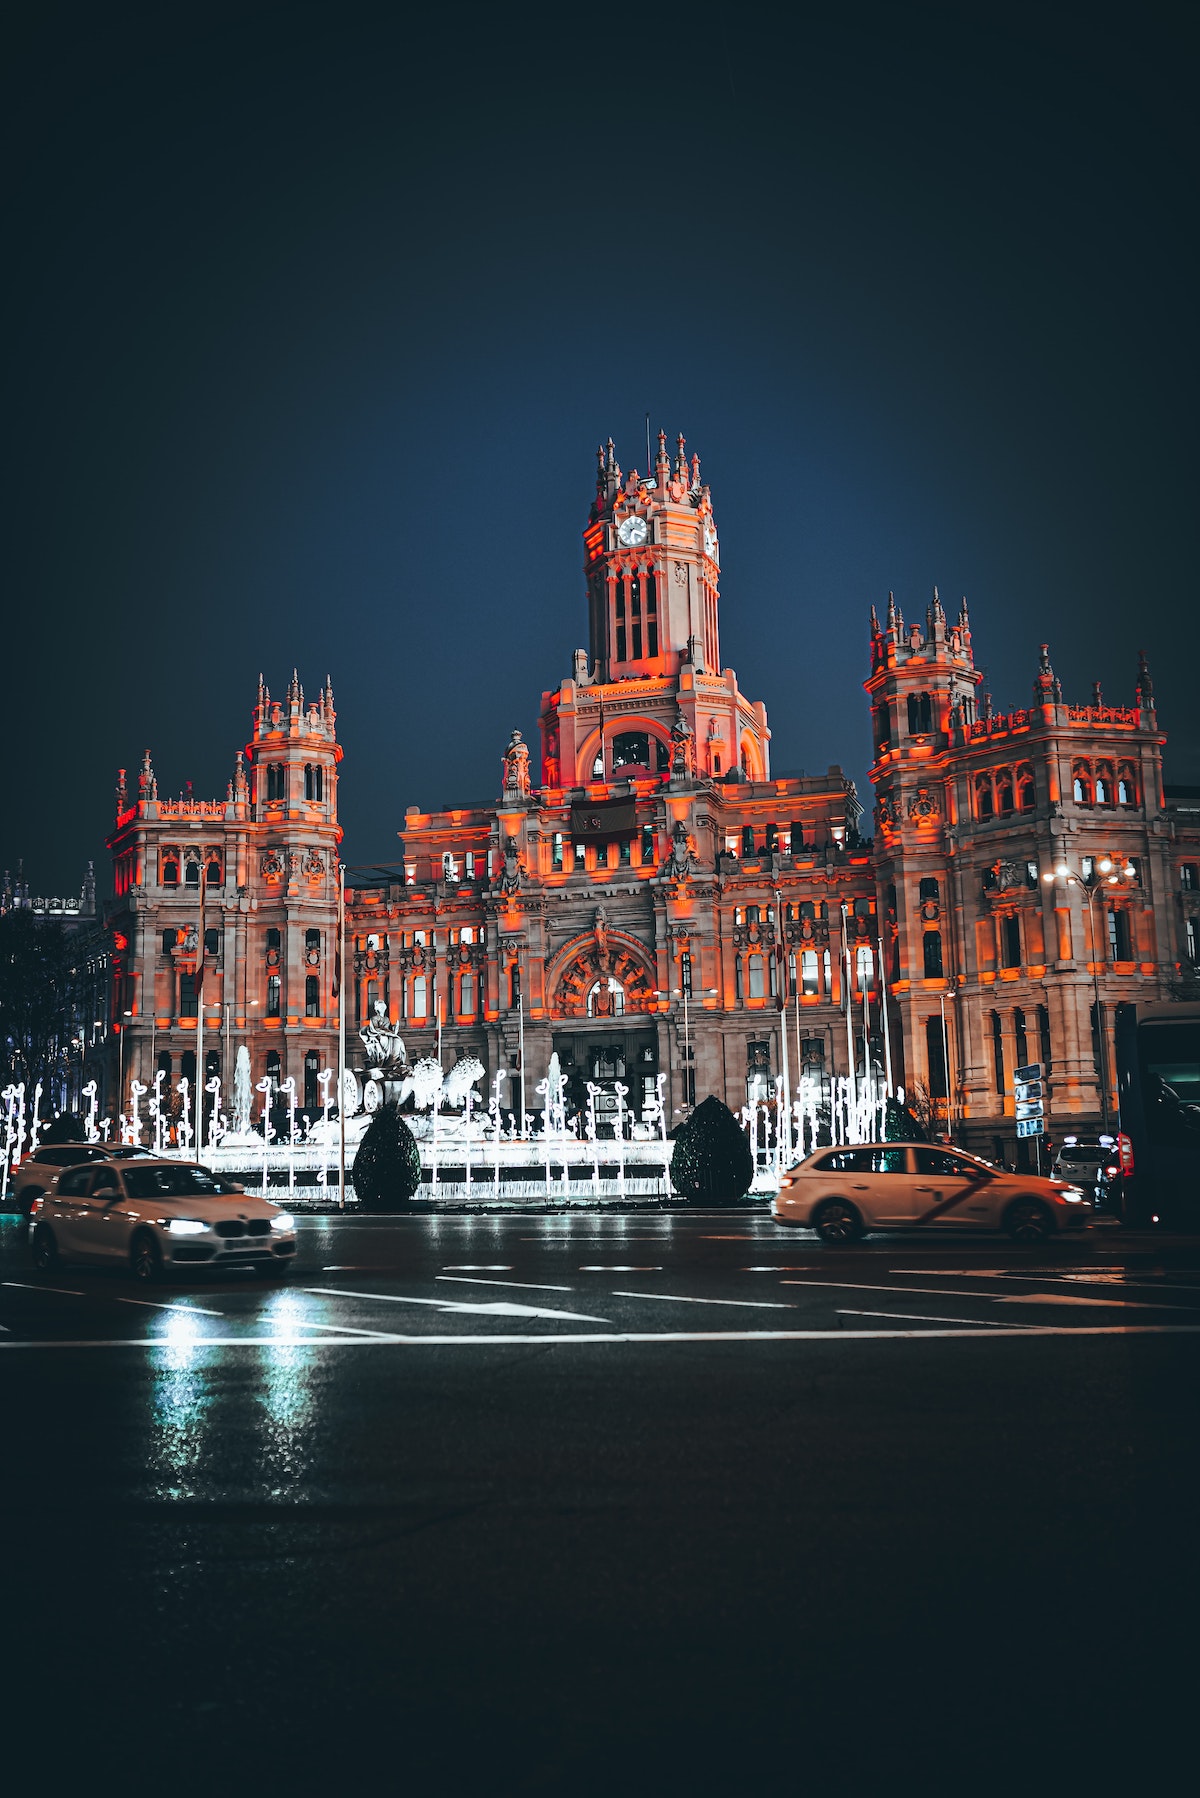 Madrid's City Hall building and the Cibeles Fountain at night.